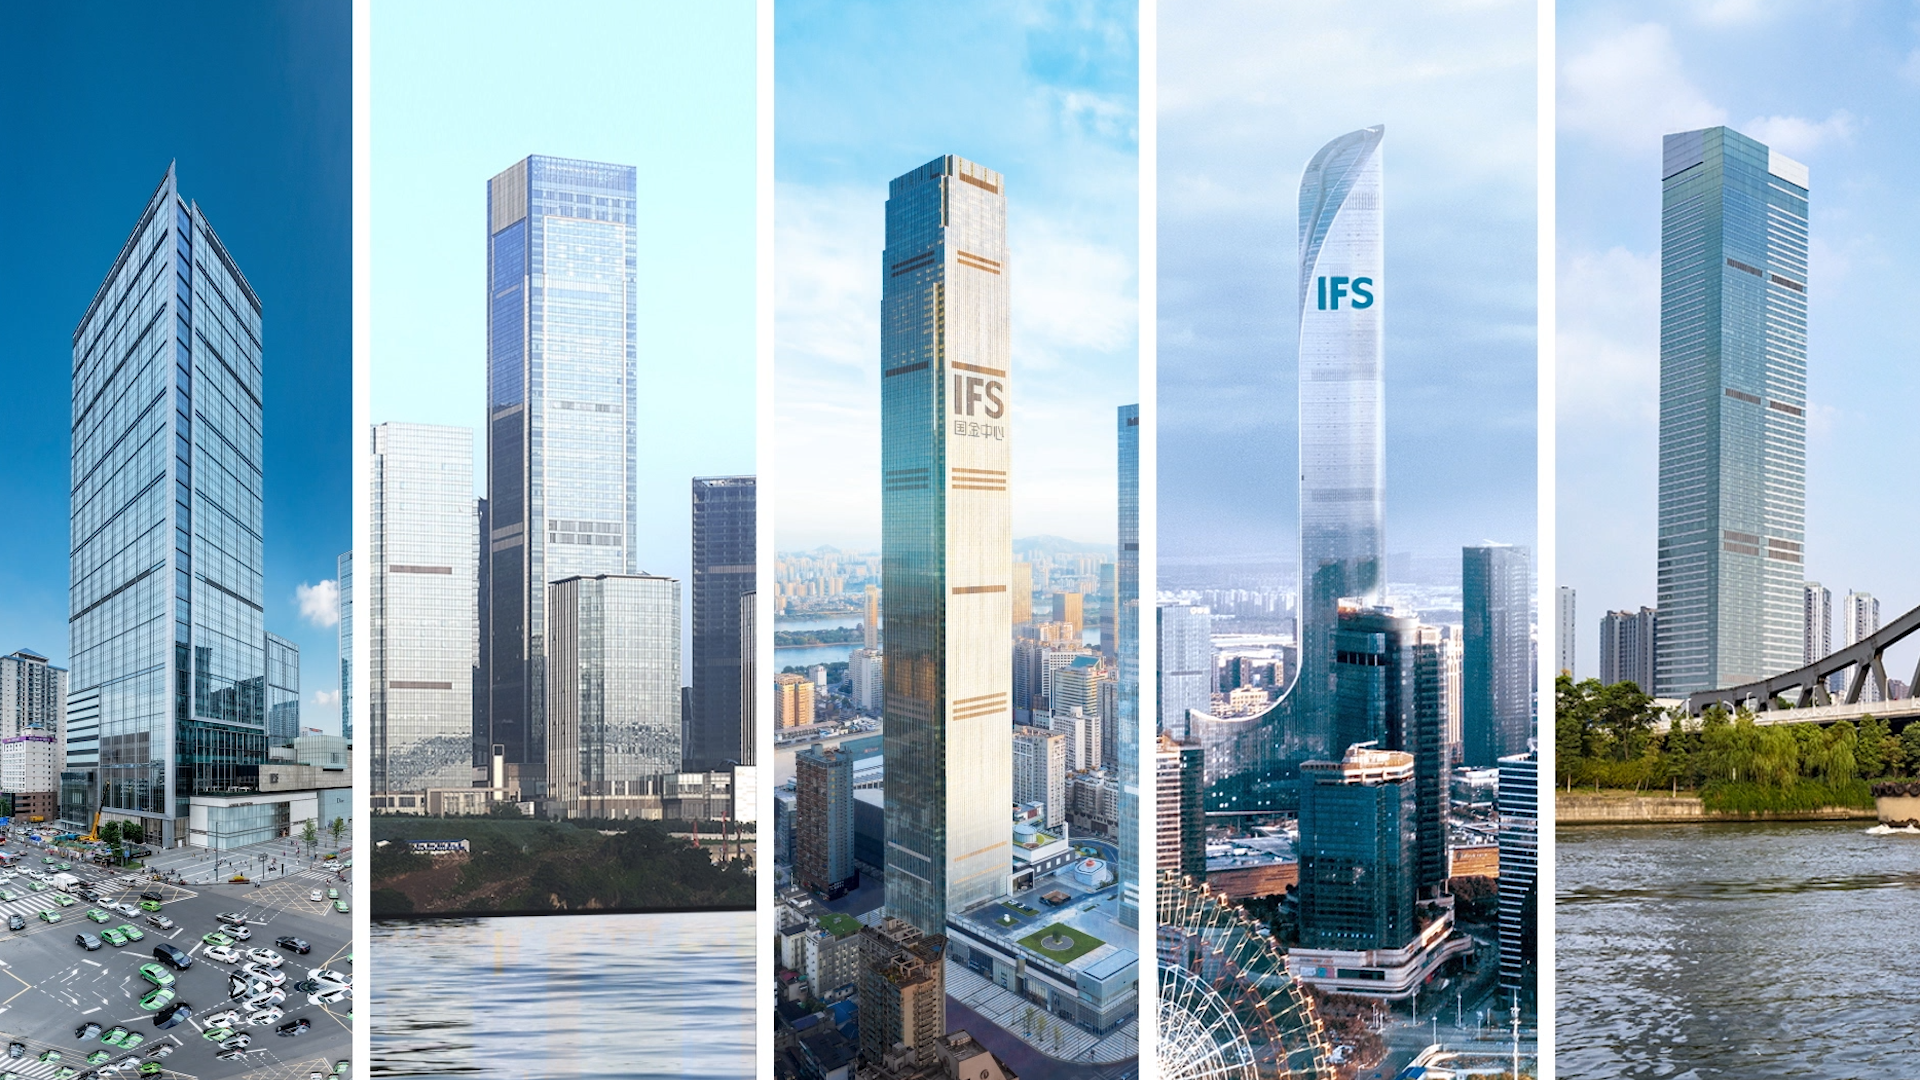 The IFS developments in the mainland Chinese cities of (from left) Chengdu, Chongqing, Changsha, Suzhou and Wuxi. Each one has helped establish its city on the global map.